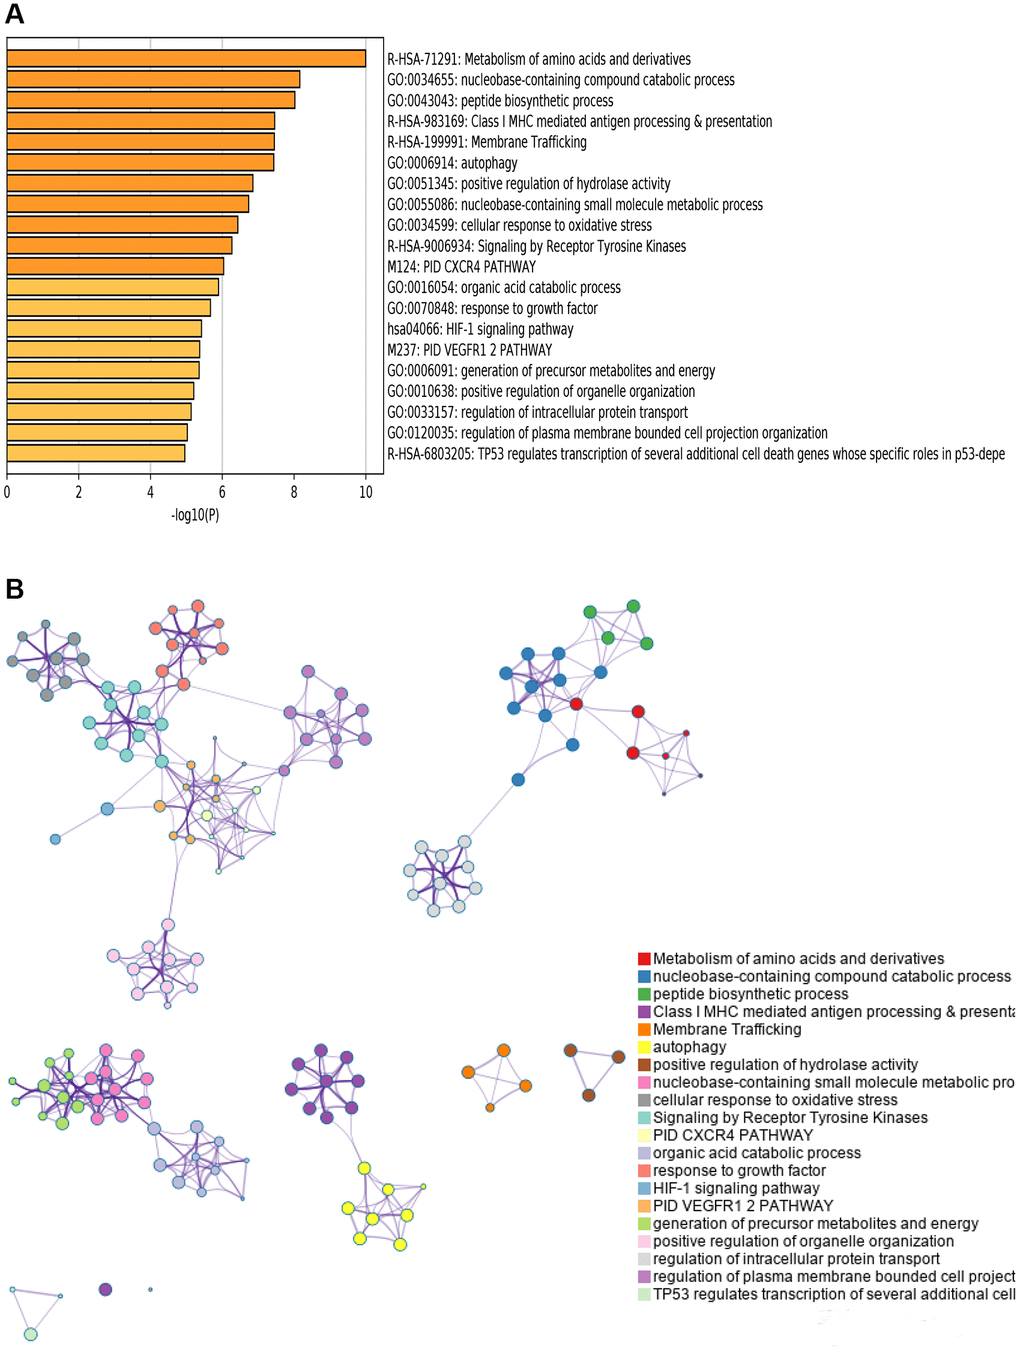 Pathway and functional enrichment analysis. (A) Top 20 pathways and functional enrichment clusters. (B) The 20 MCODE of genes from prognostic-related AS events.